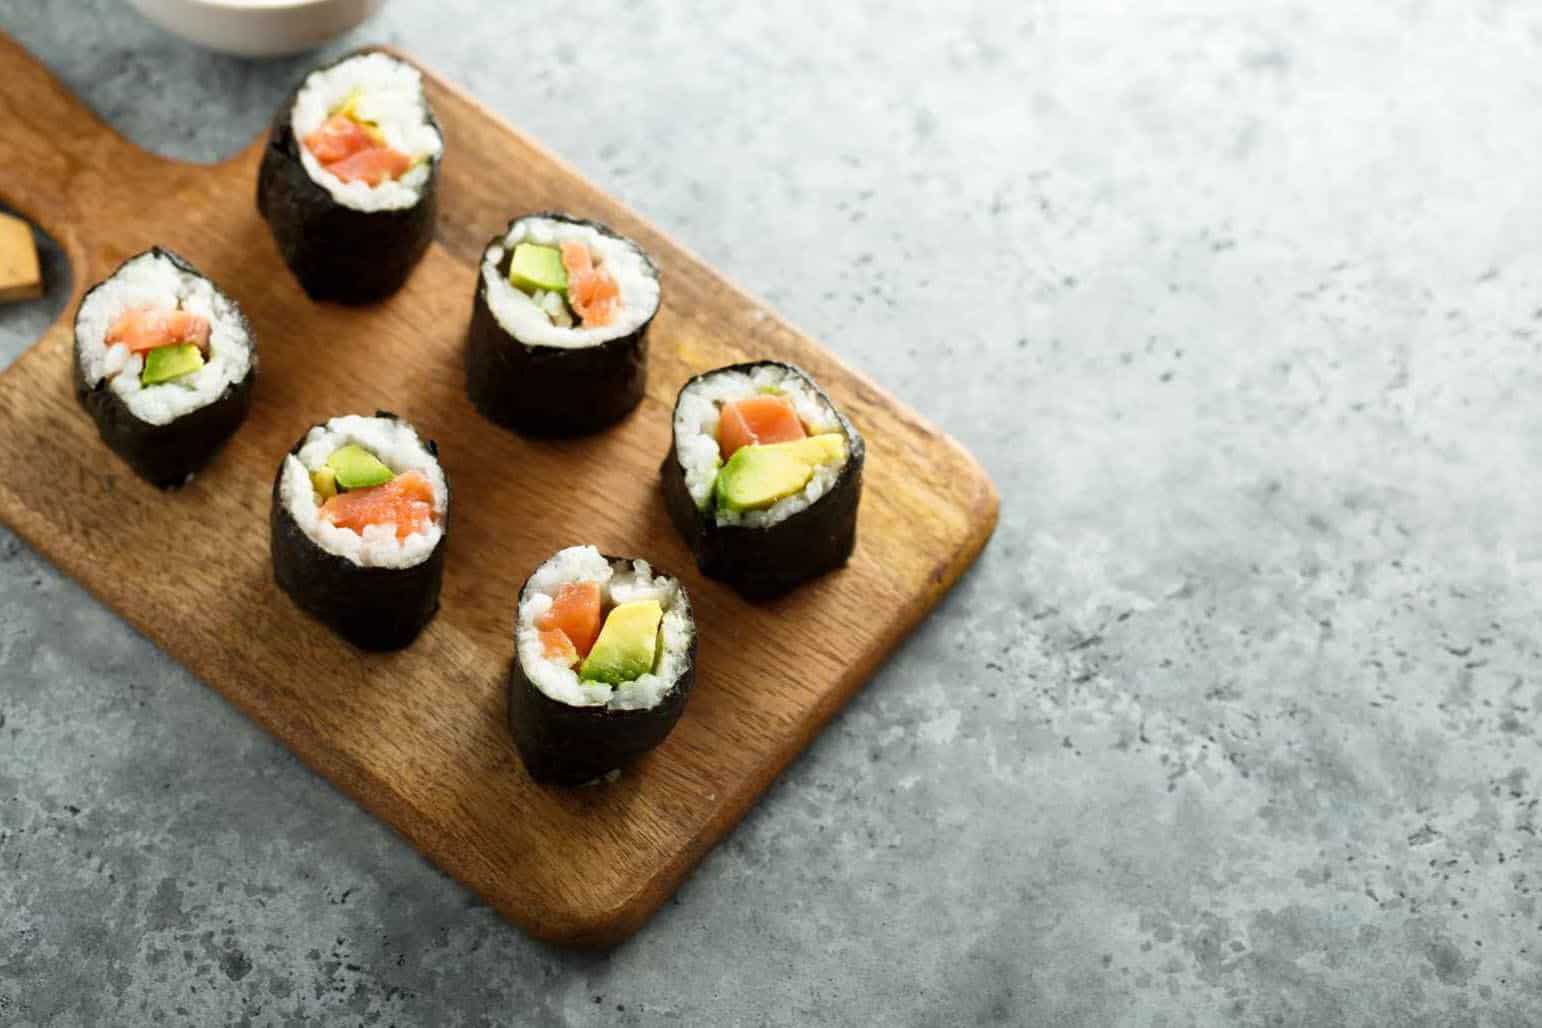 How to make sushi healthier